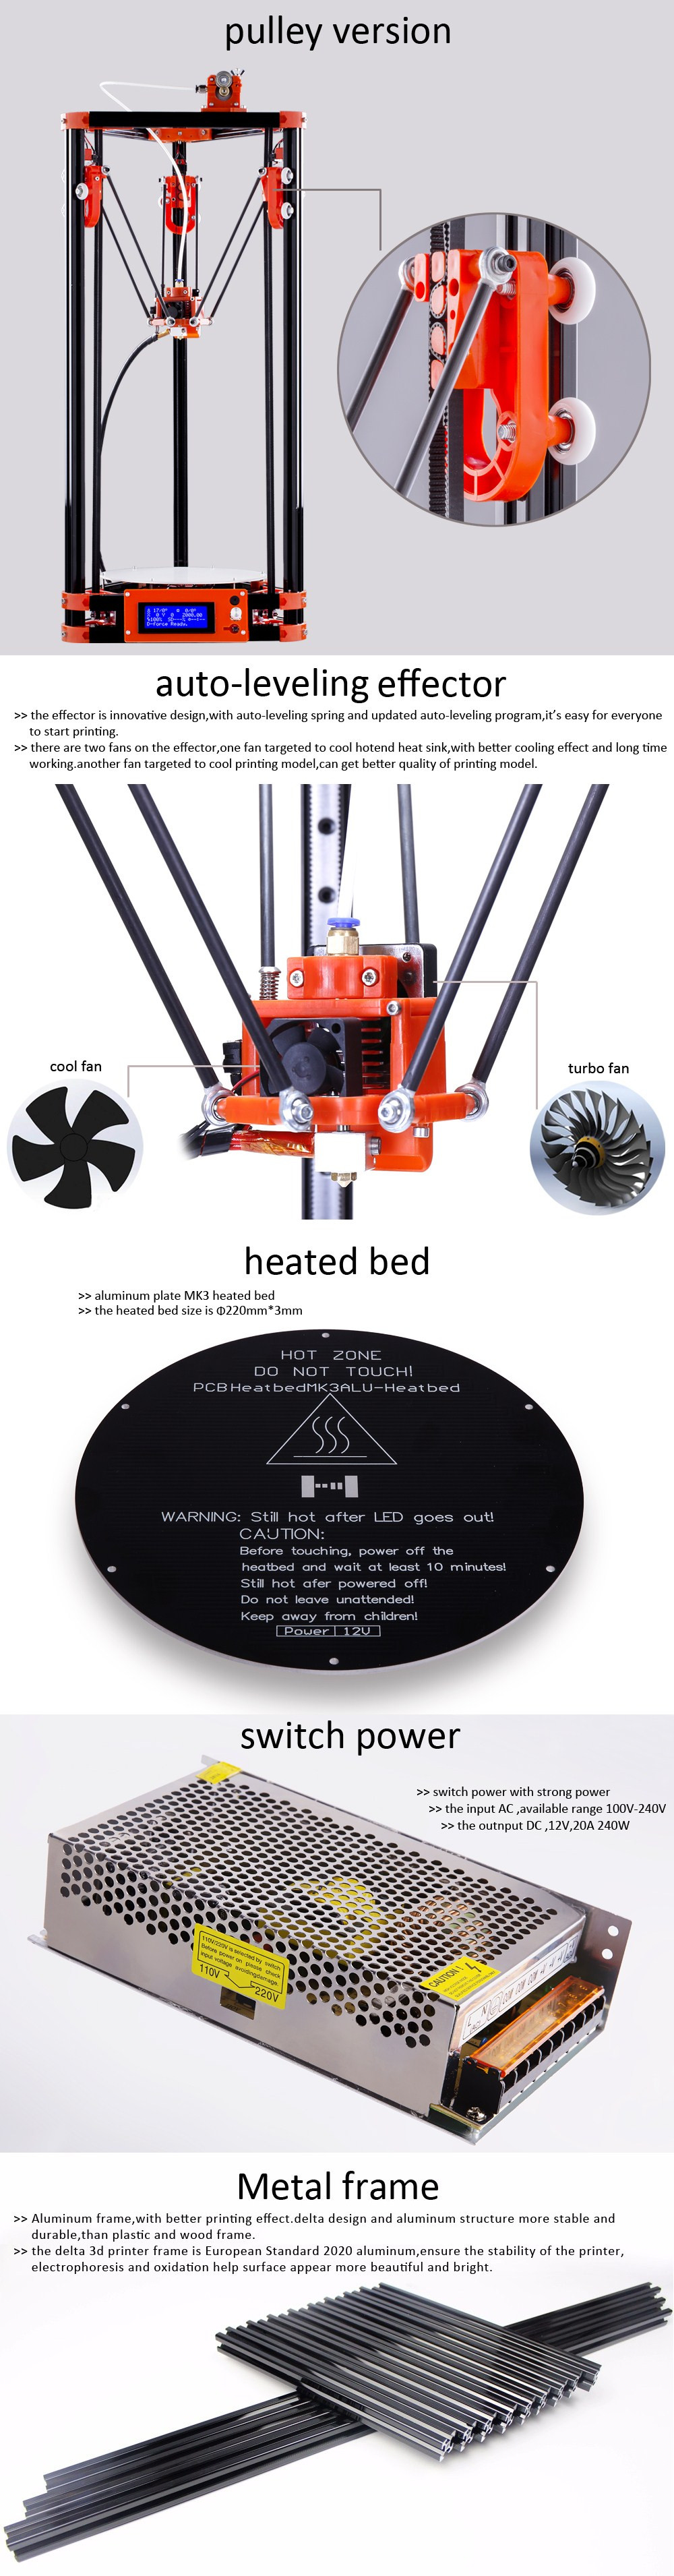 FLSUN® Delta Kossel 3D Printer 180*315mm Printing Size With Auto-leveling Dual Cooling Fans Heated Bed 1.75mm 0.4mm Nozzle 4